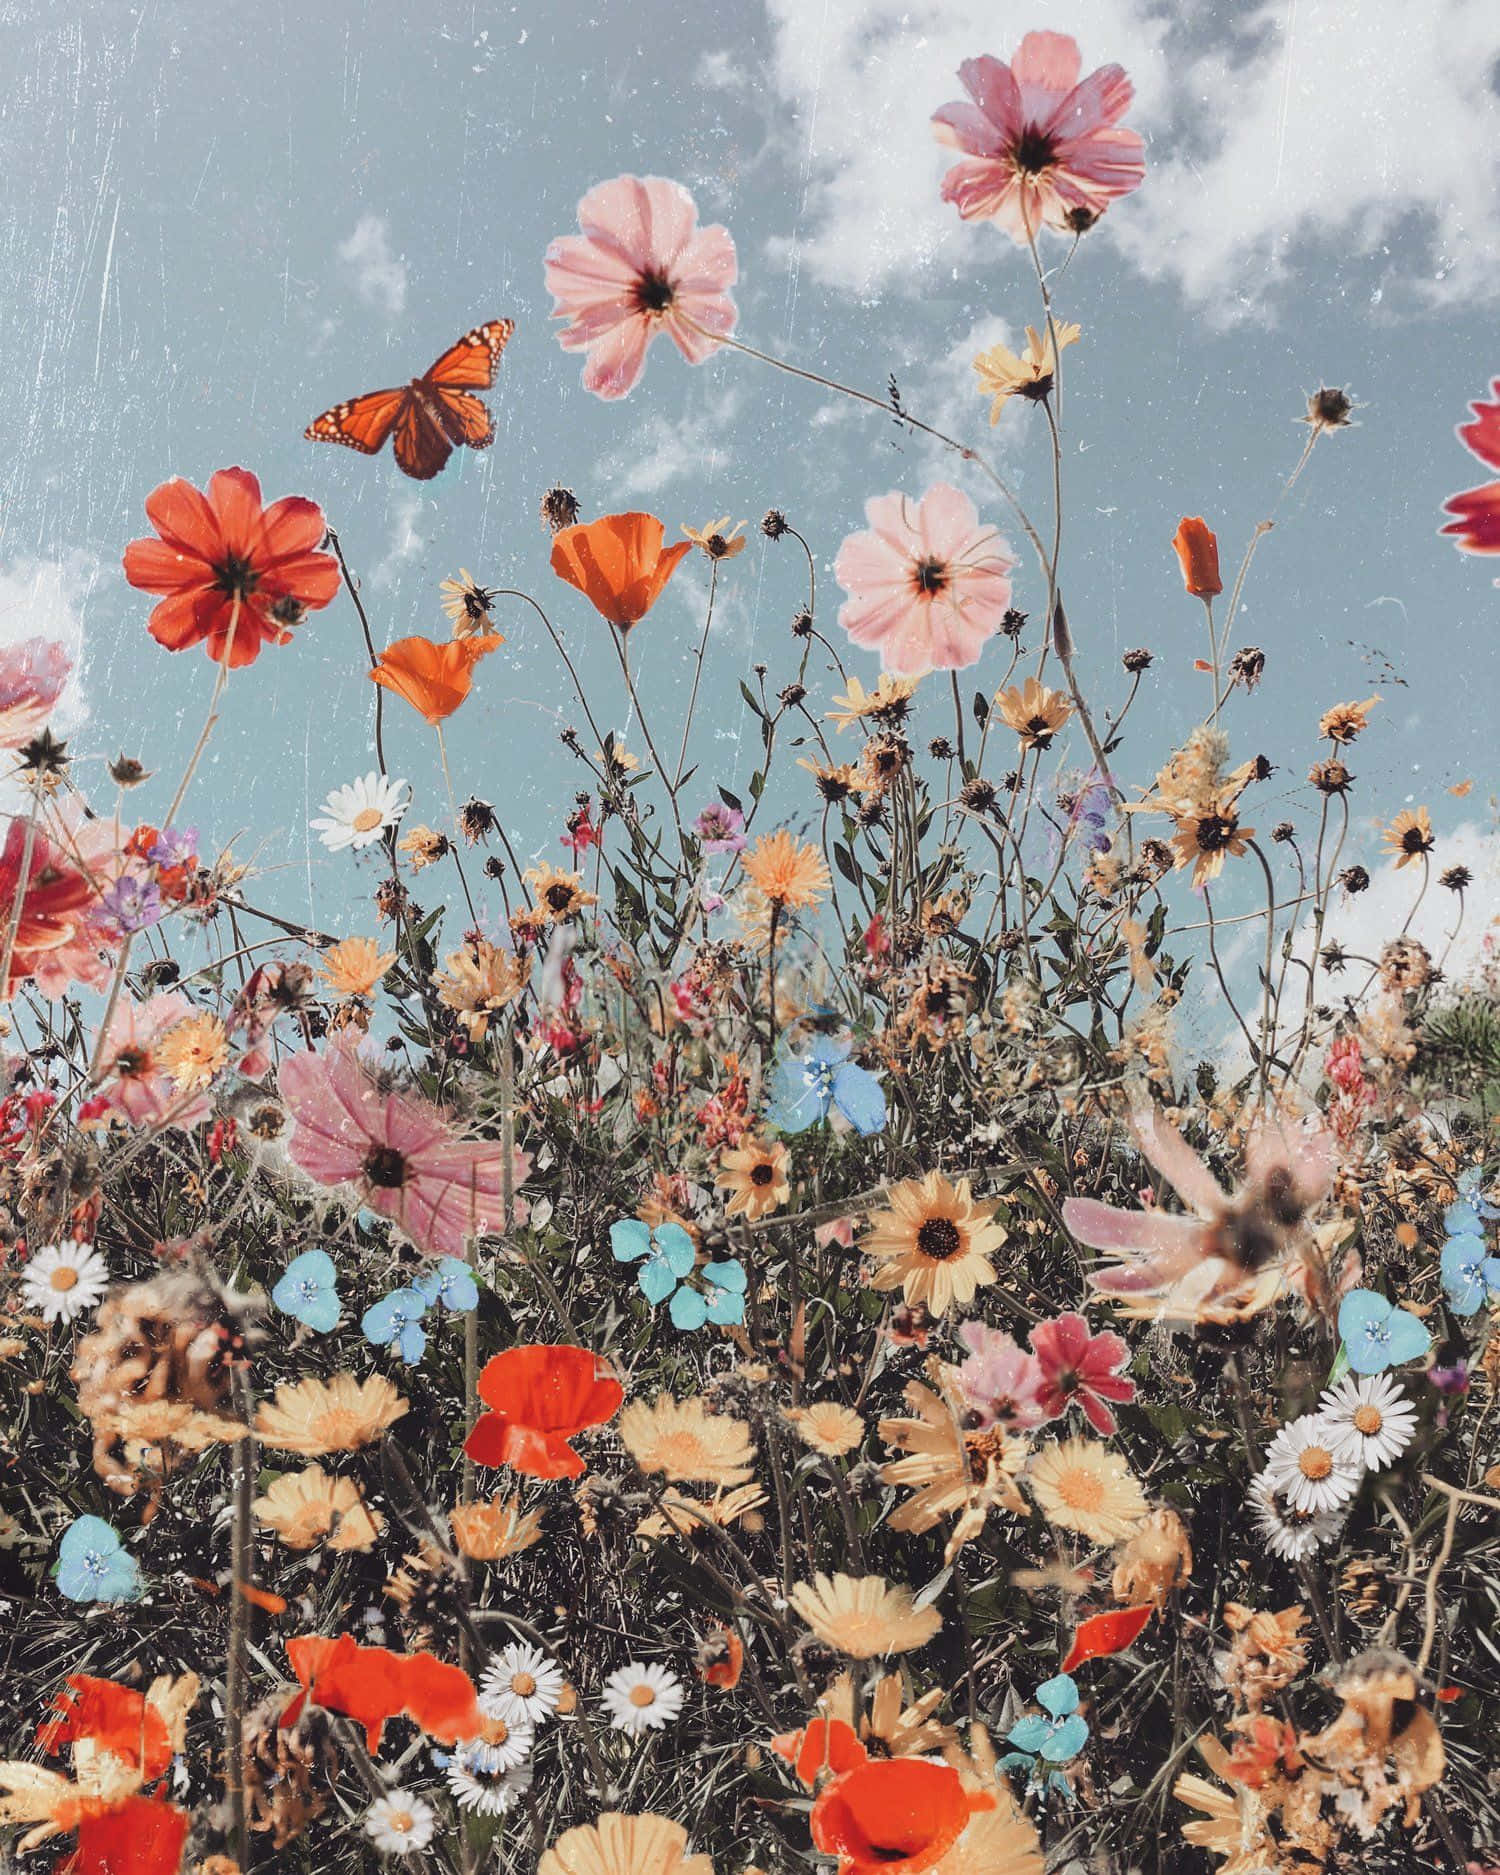 31000 Aesthetic Flower Pictures